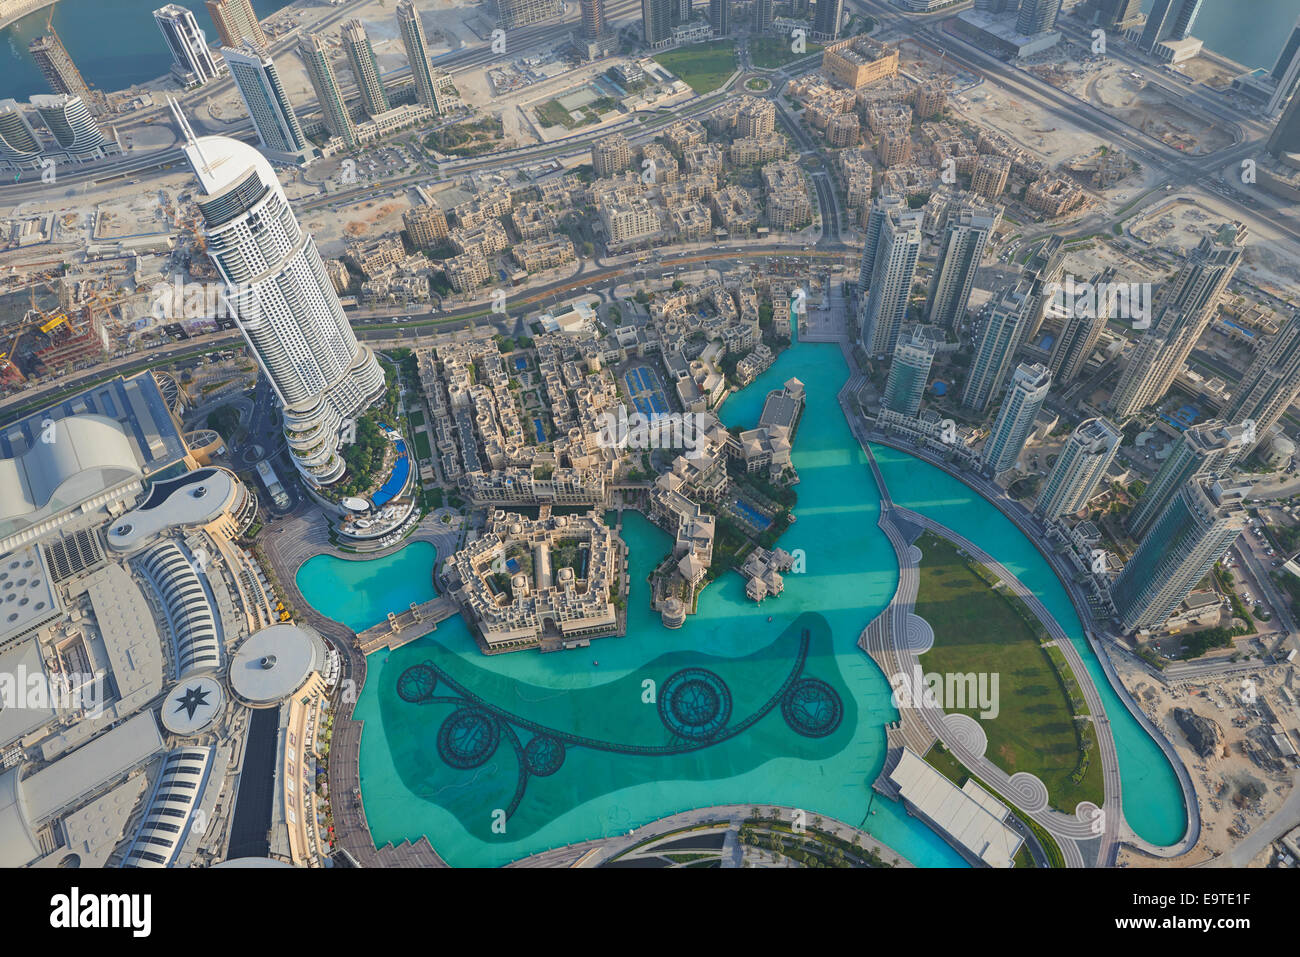 View Over Dubai From The World's Highest Observation Deck At 555 Meters High On Level 148 Of The Burj Khalifa Dubai UAE Stock Photo